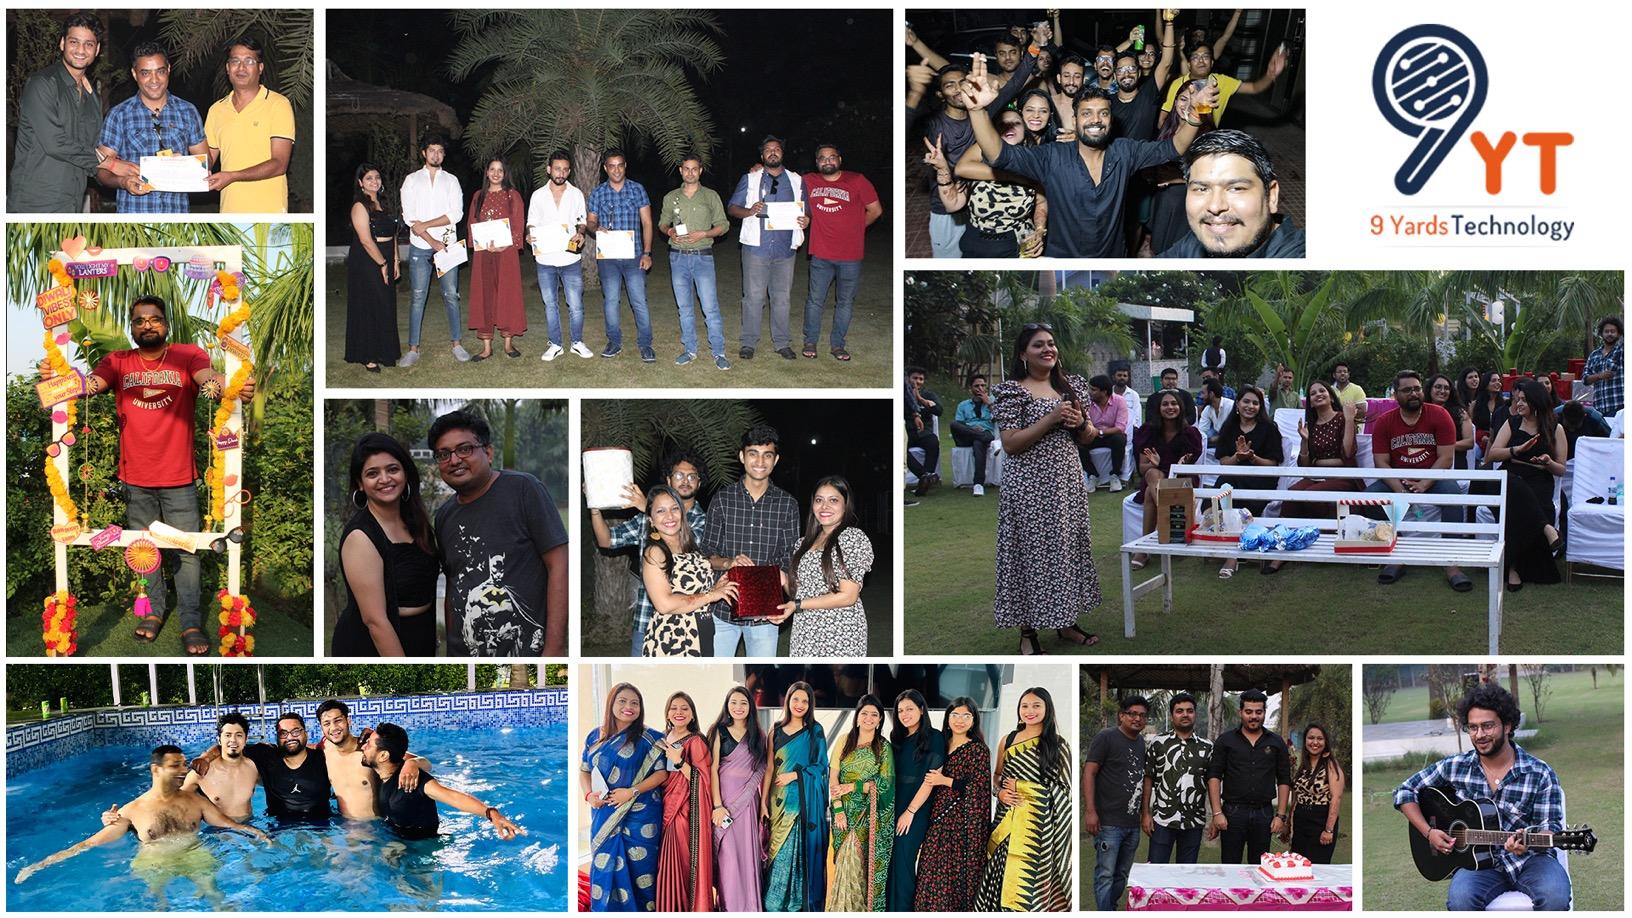 A Glimpse of 9Yards Technology’s Grand Pre-Diwali Extravaganza!